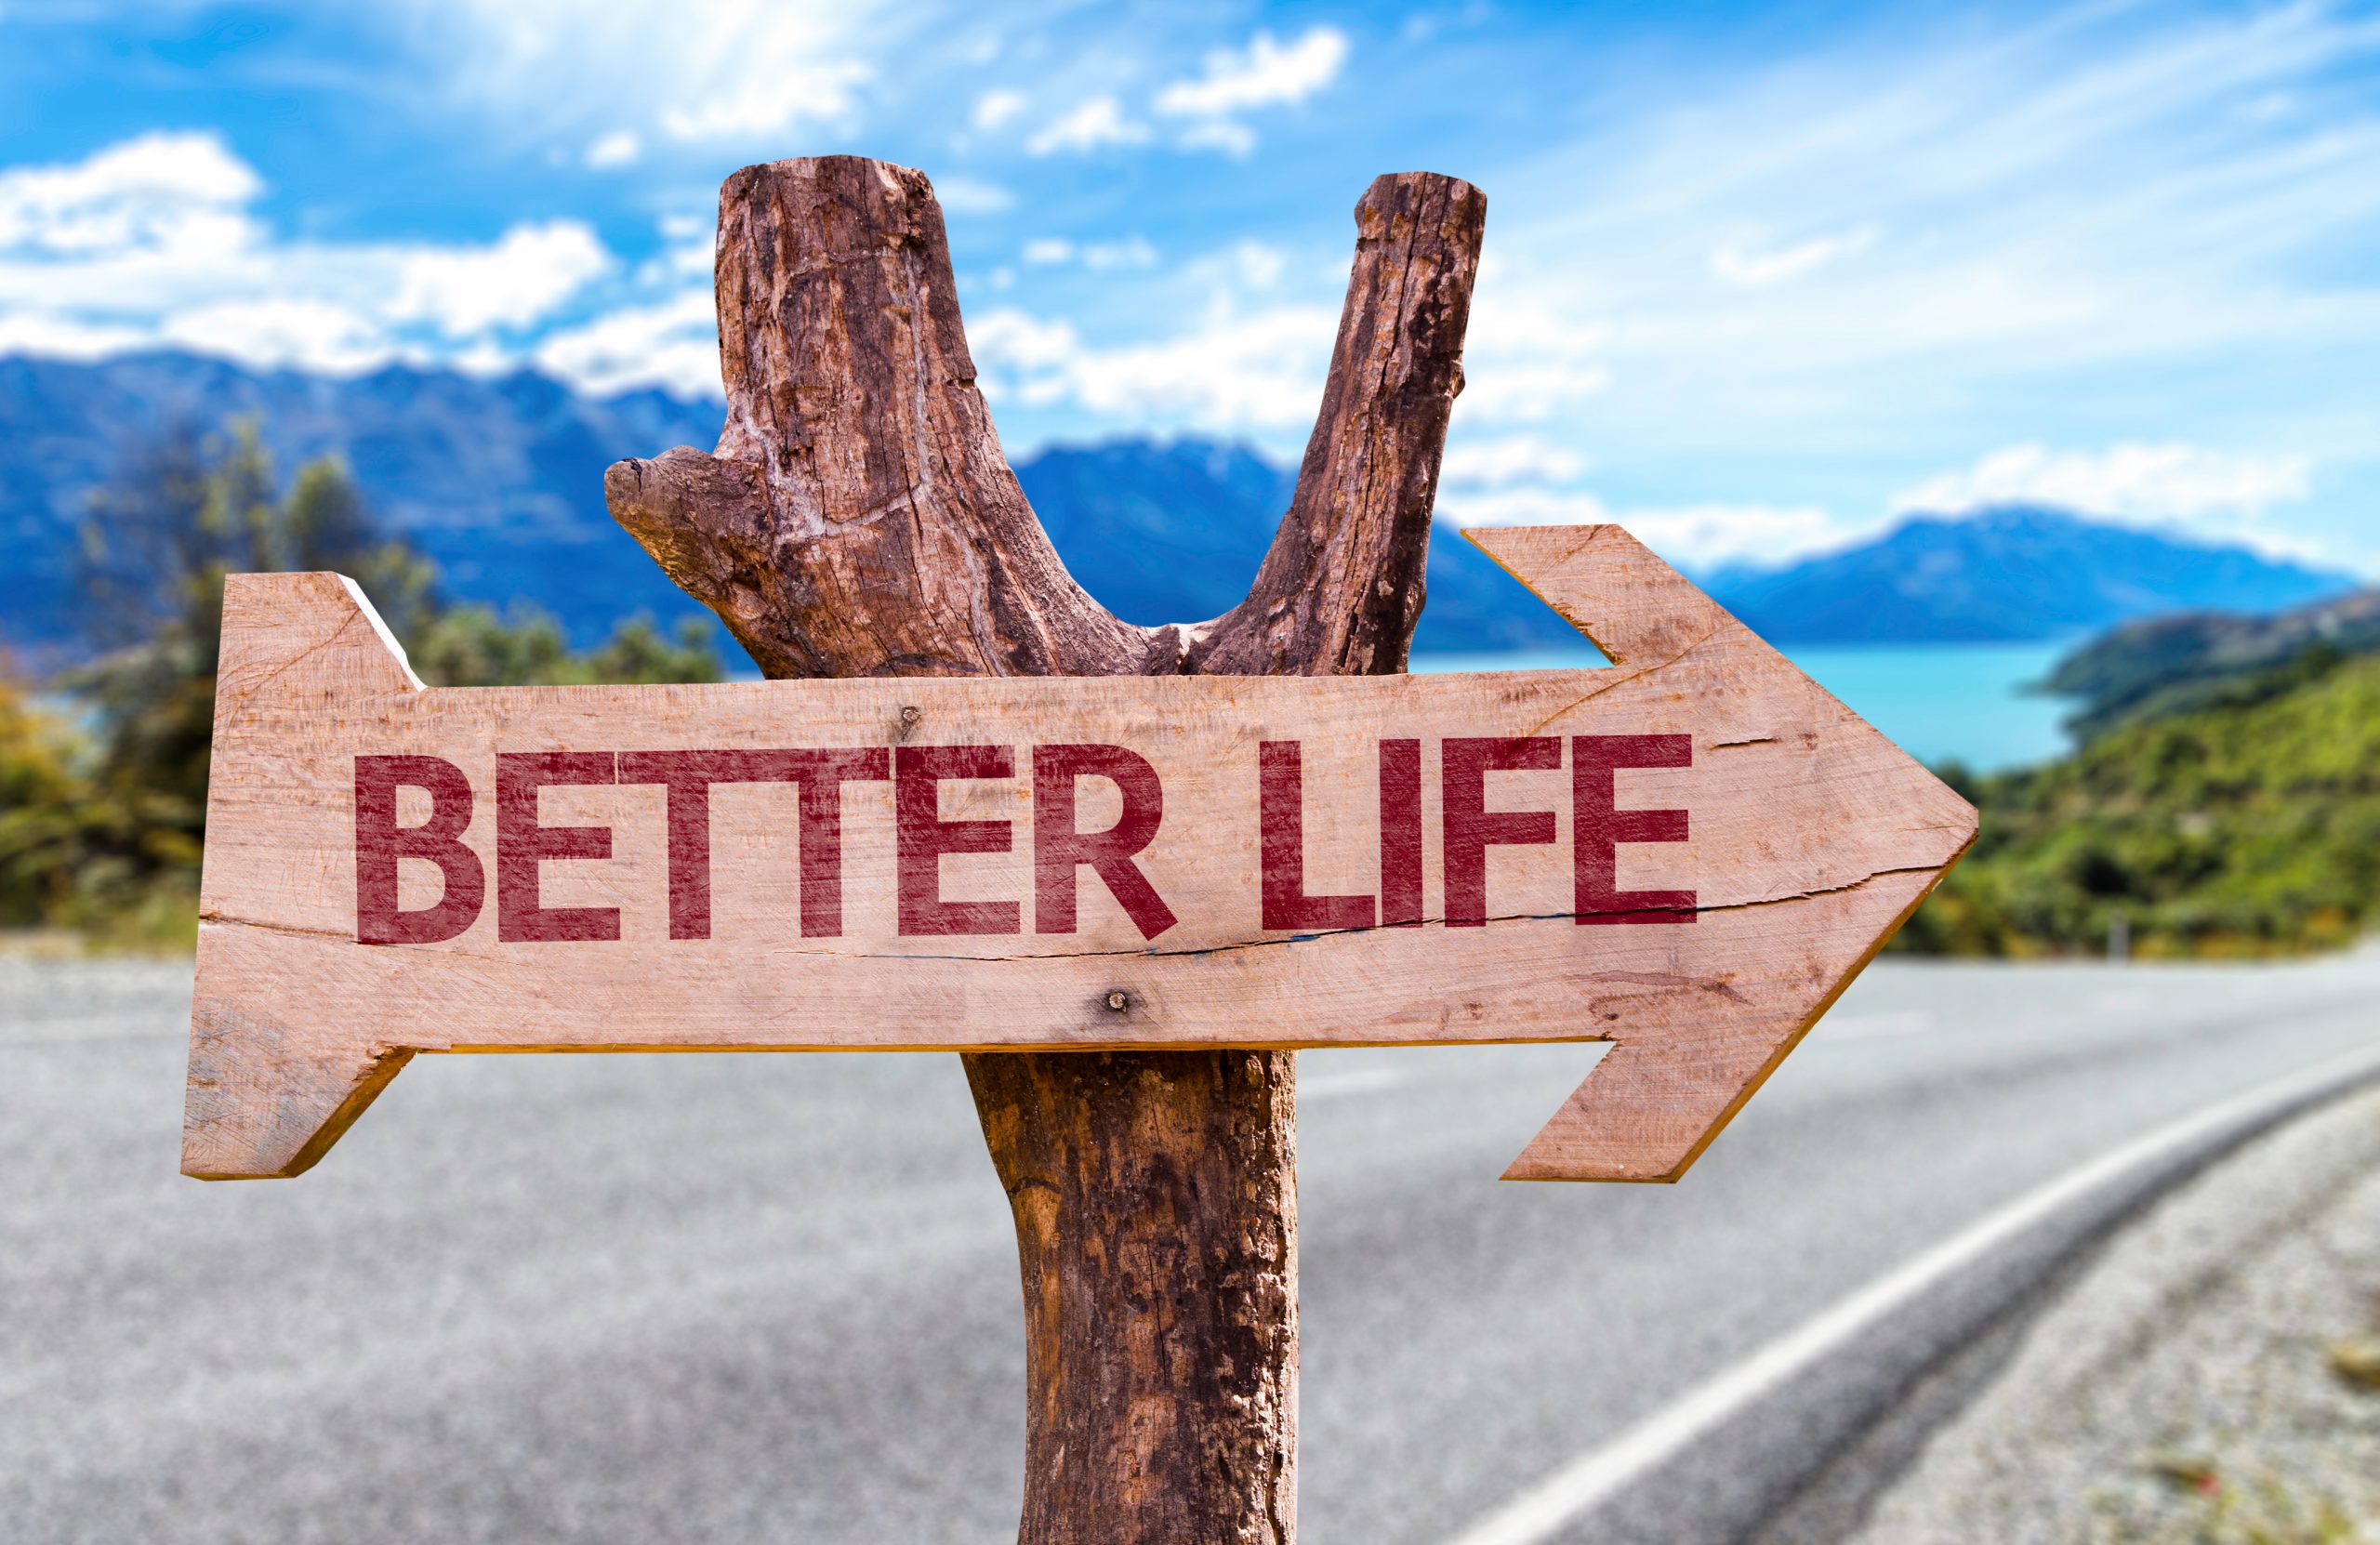 Better Life wooden sign with a landscape on background